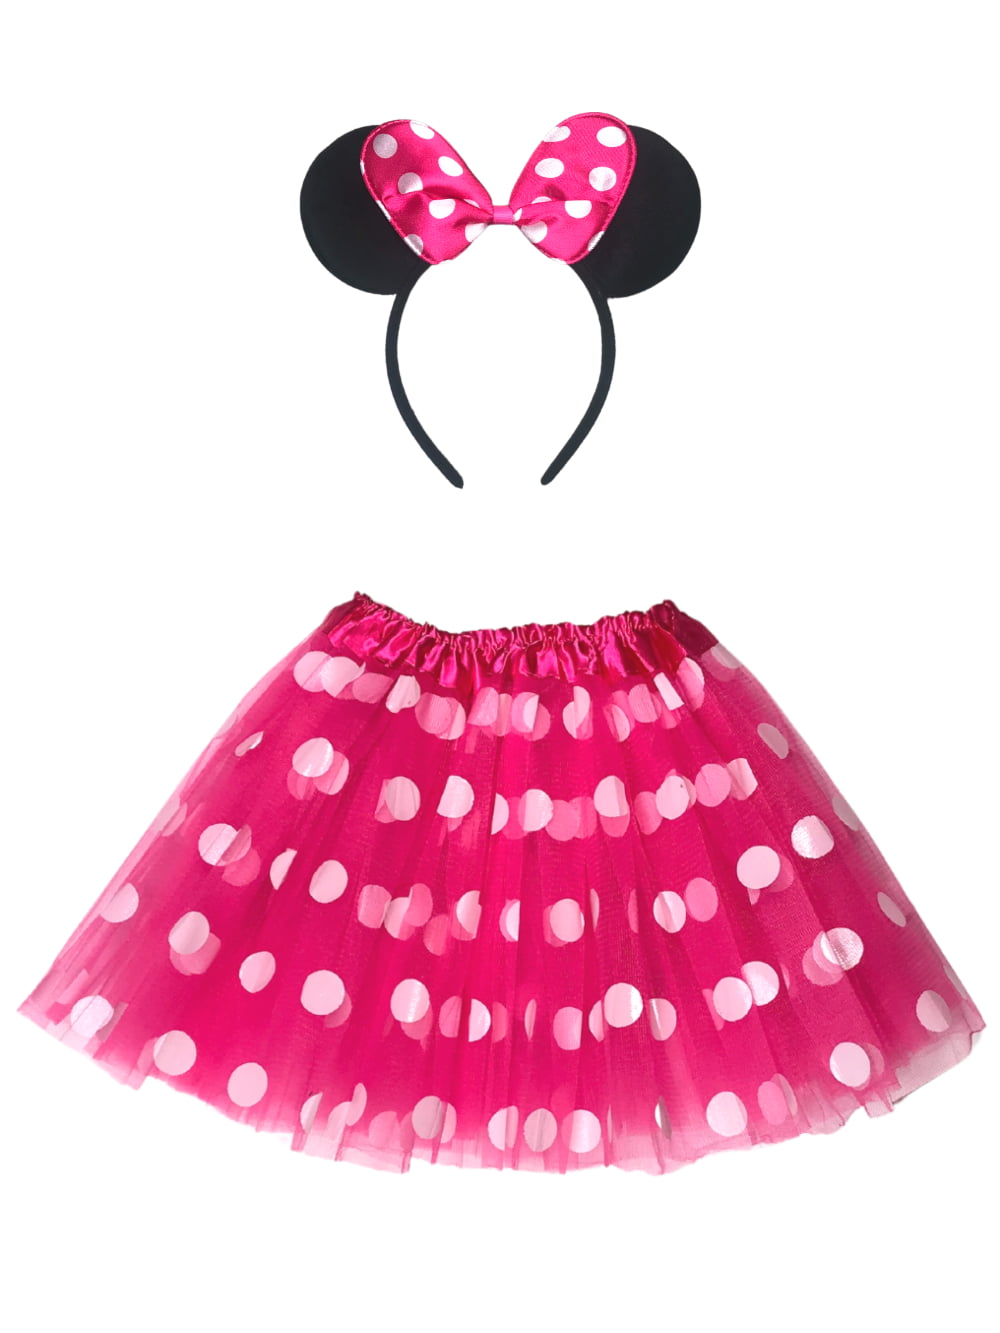 NEW KIDS MINNIE MOUSE COSTUME TUTU FANCY DRESS WITH EARS 2-11Y 